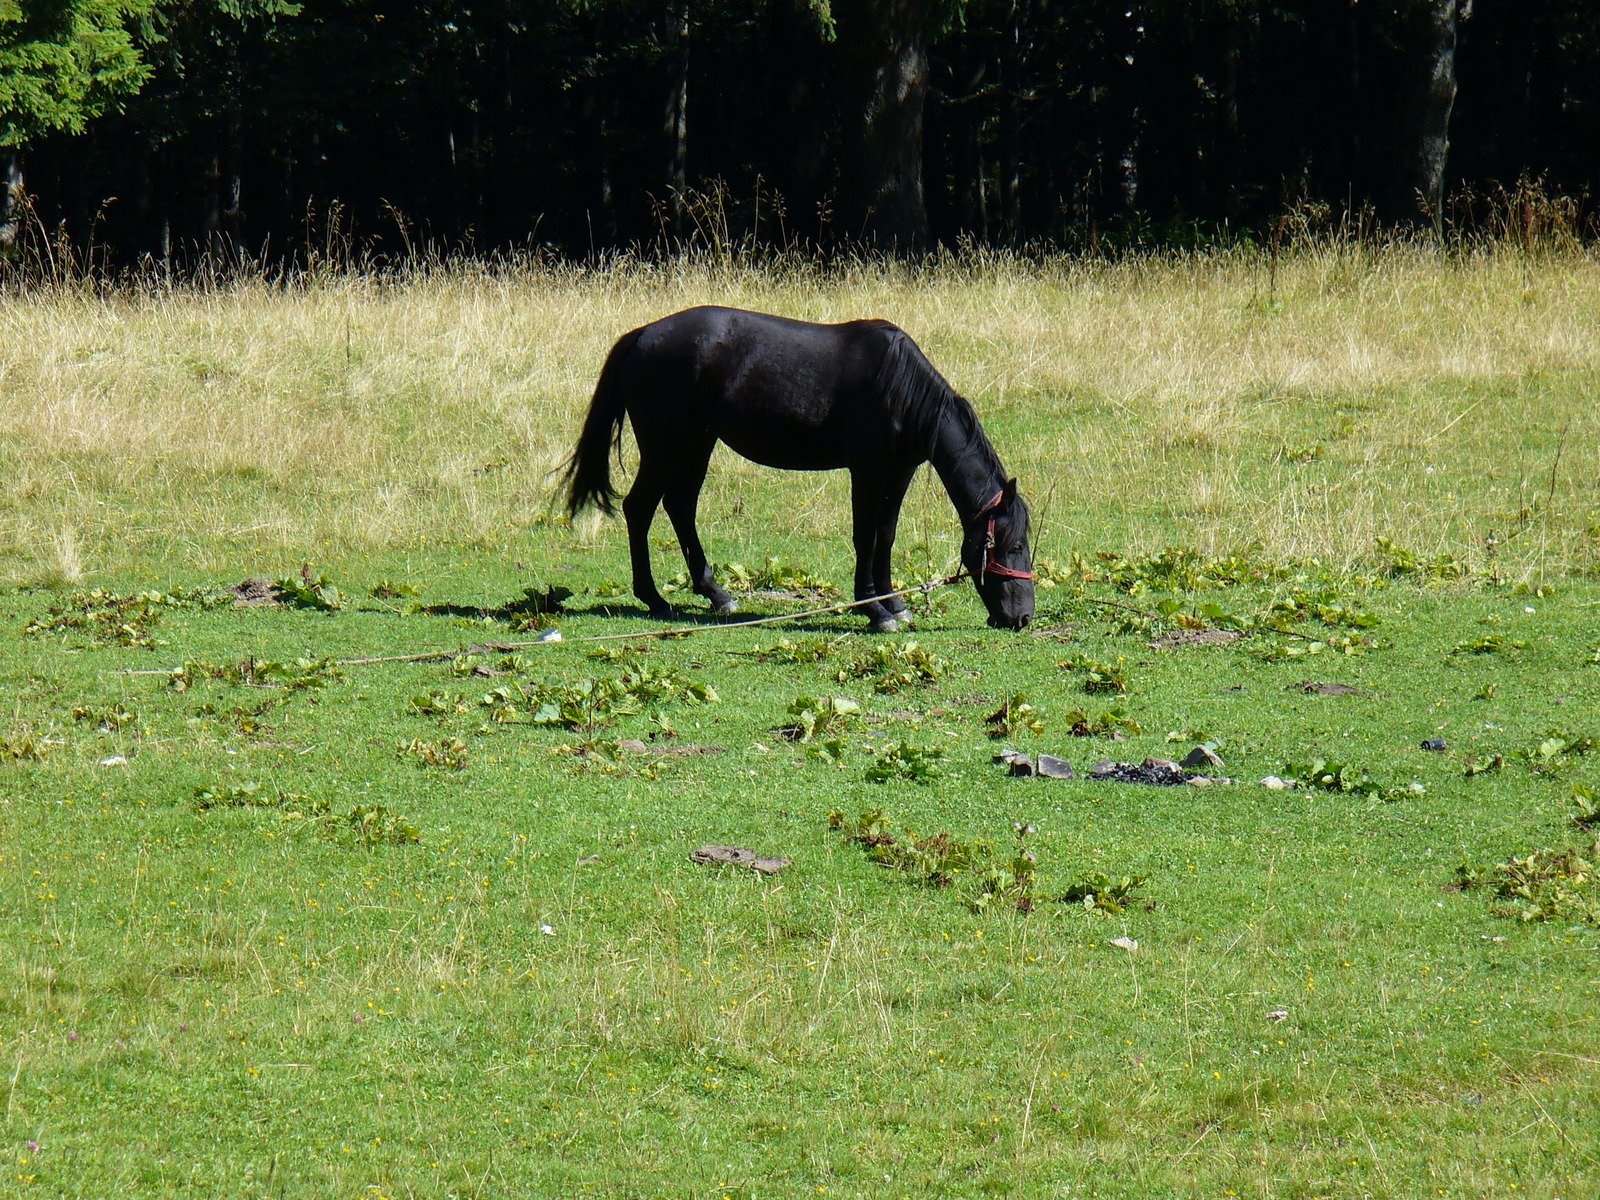 the horse is grazing in the grass alone